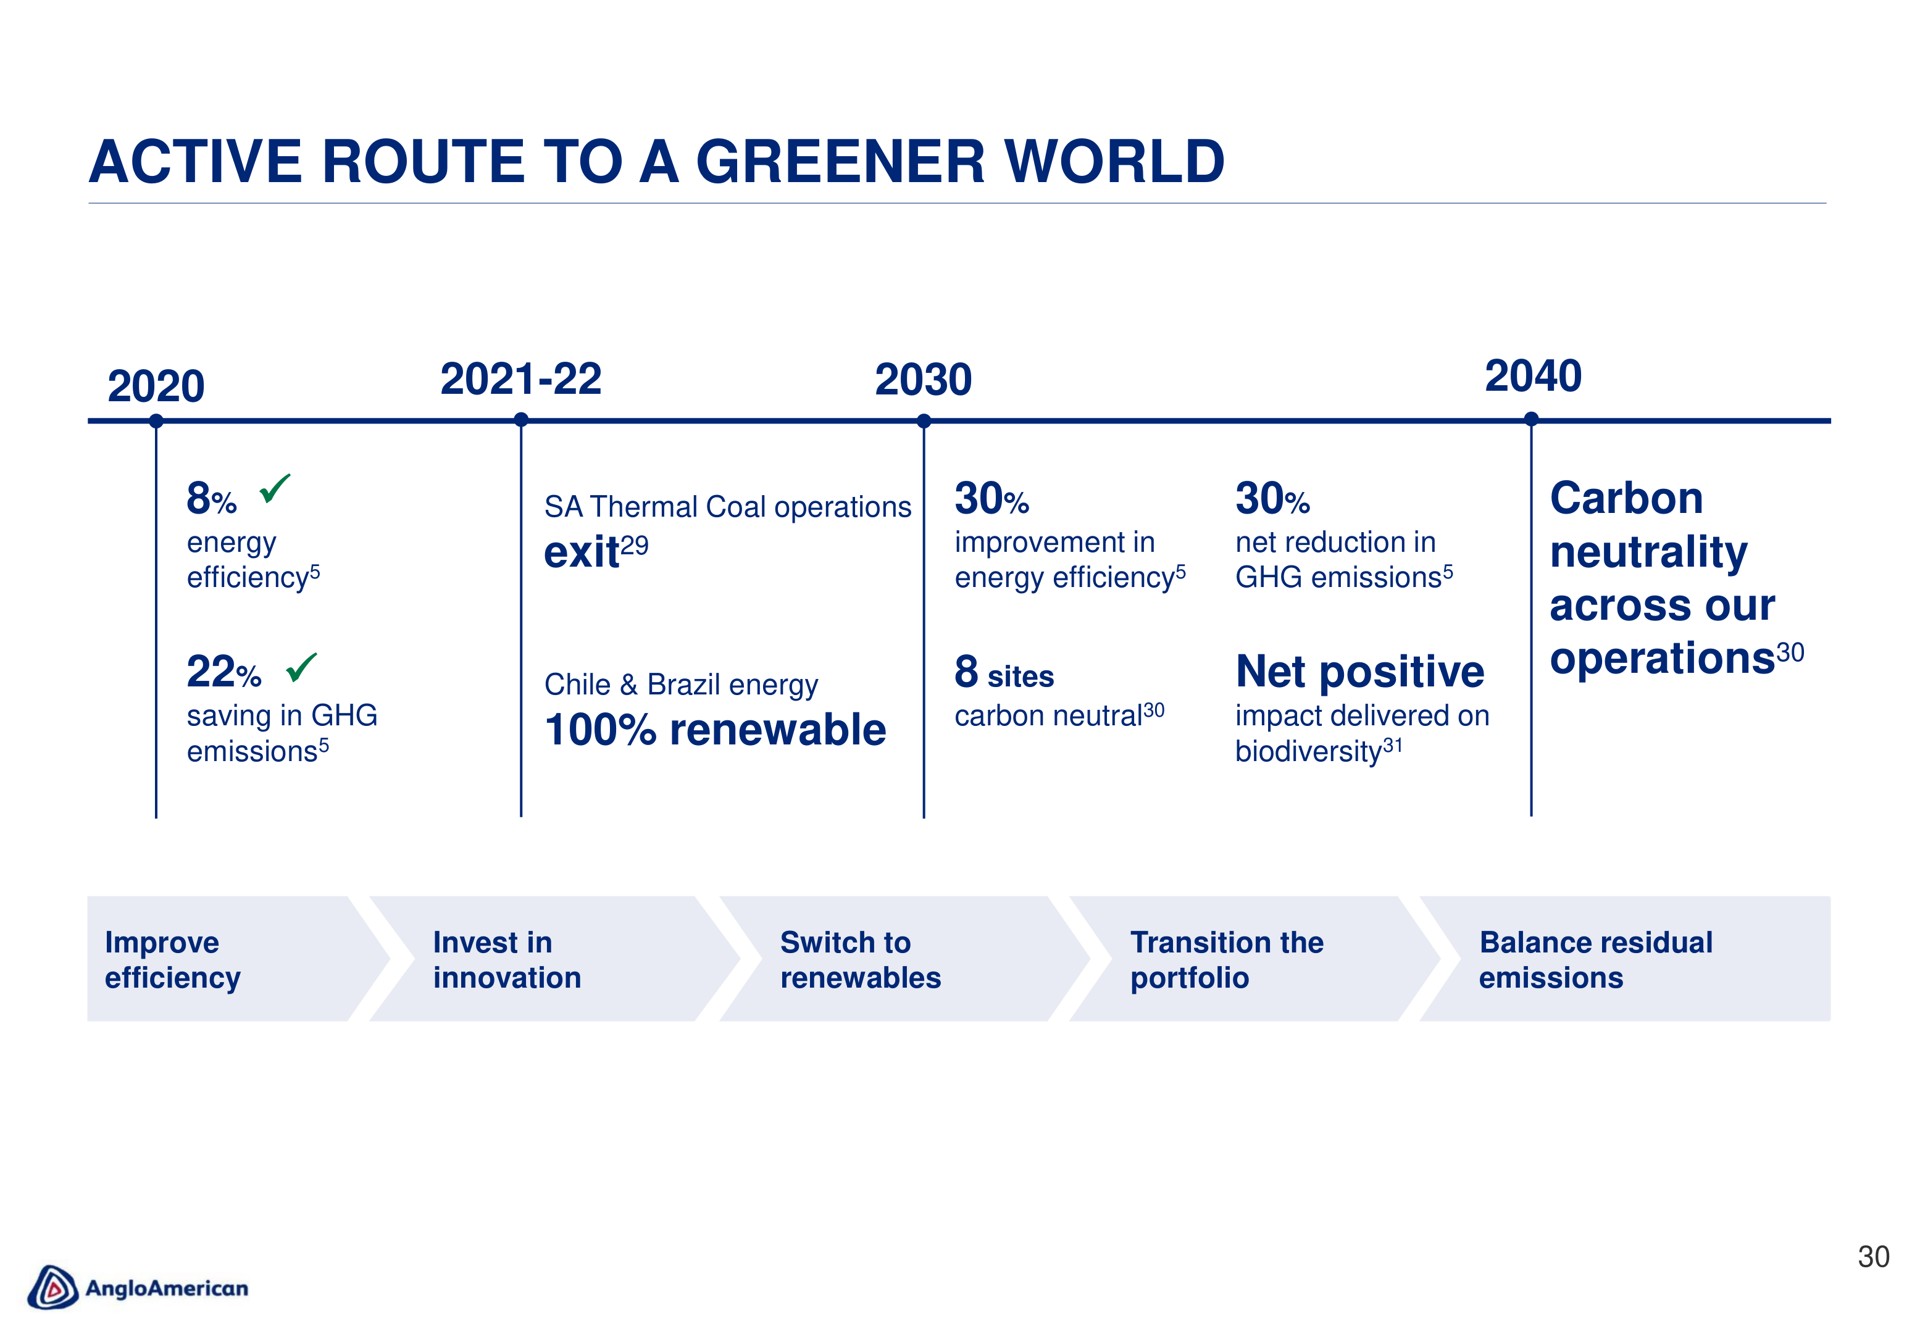 active route to a greener world | AngloAmerican